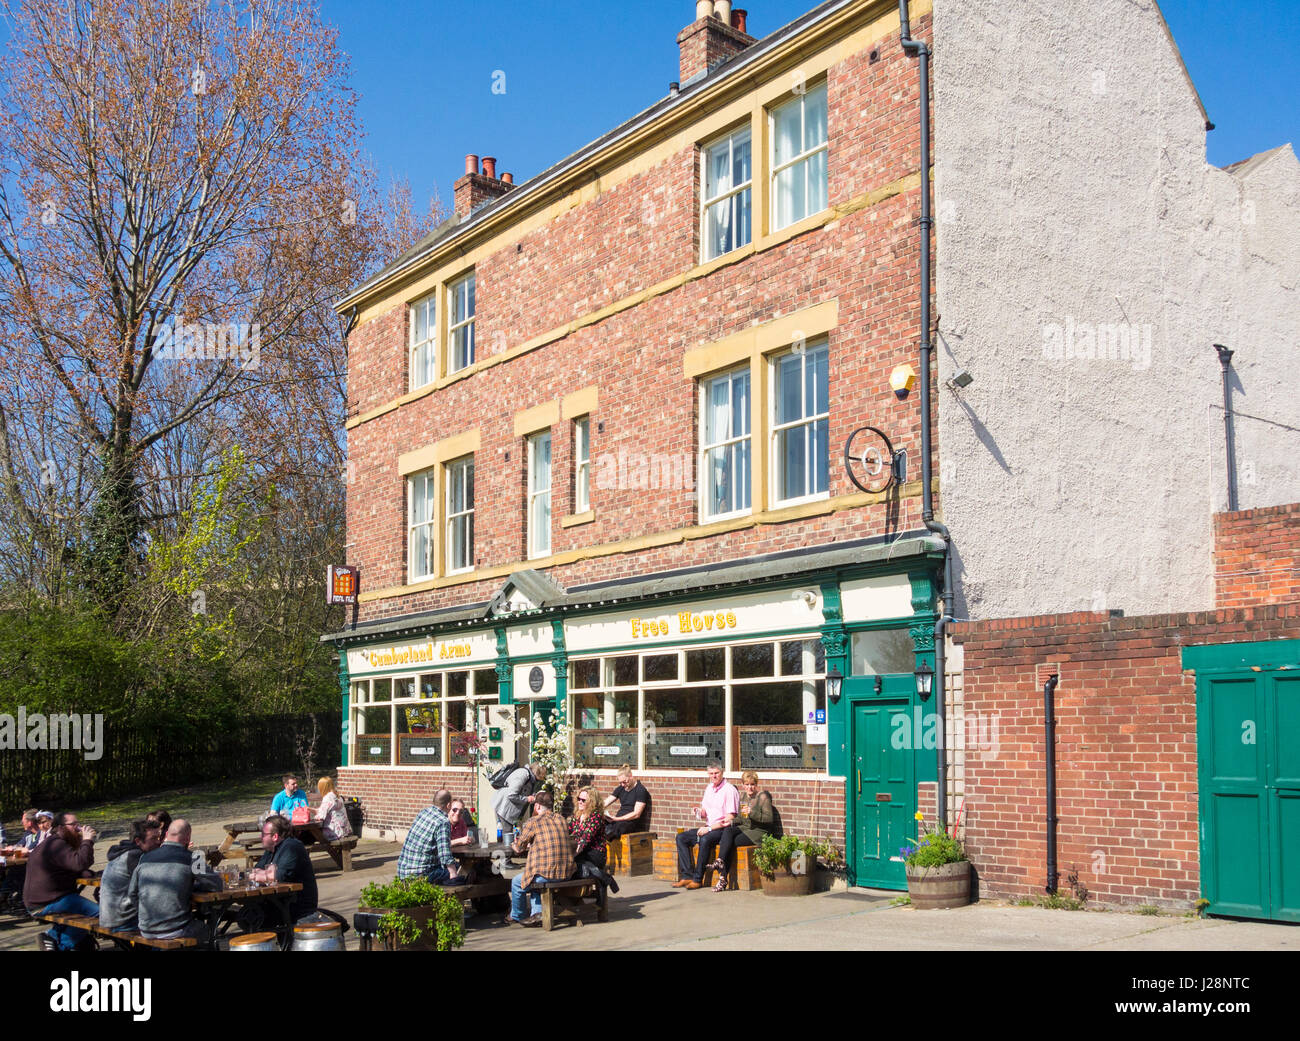 Il Cumberland Arms pub a Ouseburn Valley vicino a Byker, Newcastle upon Tyne. Regno Unito Foto Stock